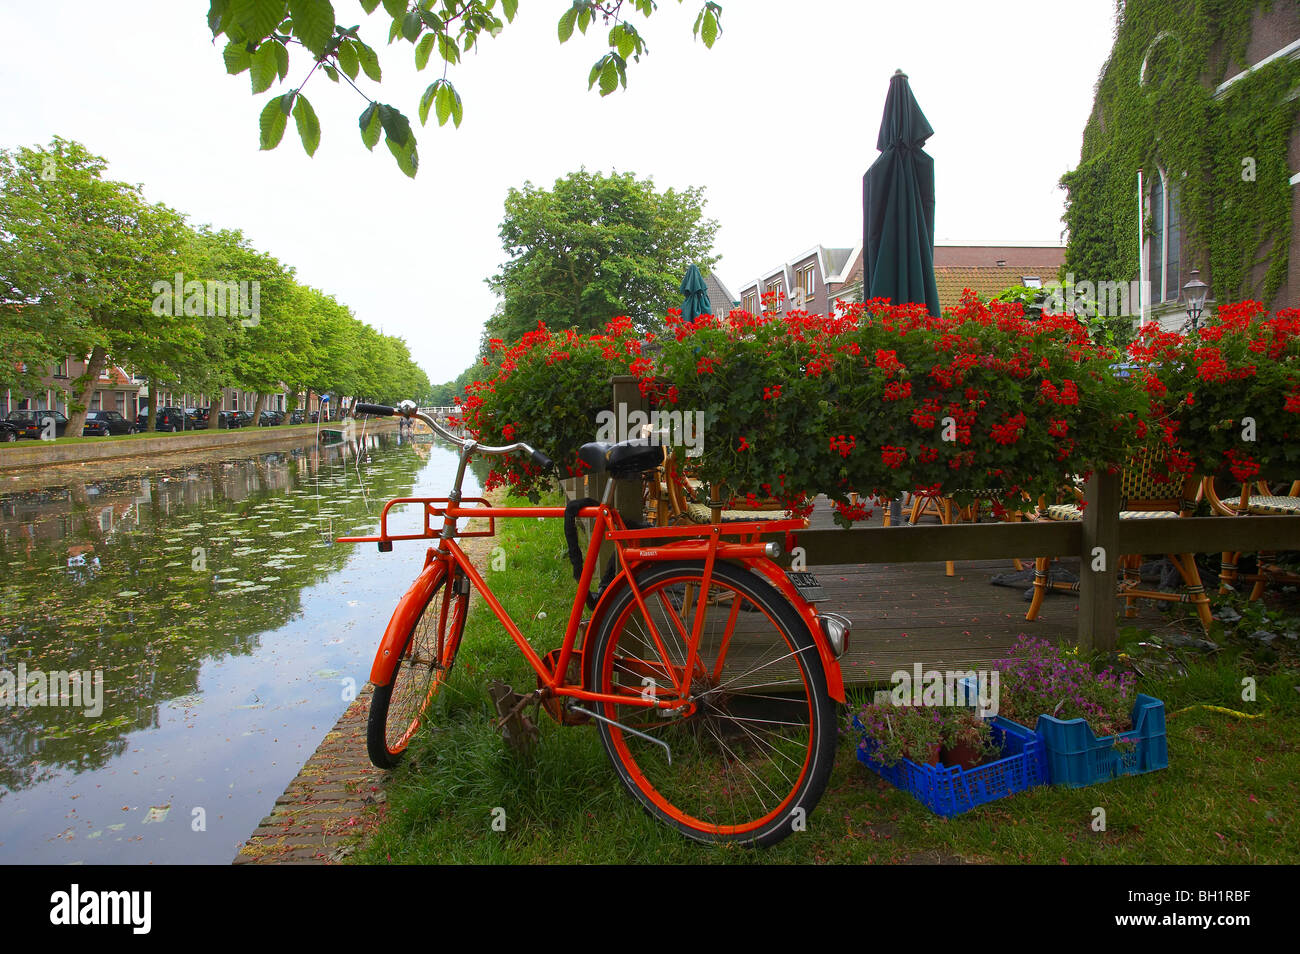 Red bicycle standing at the banks of a gracht canal, Weesp, Netherlands, Europe Stock Photo